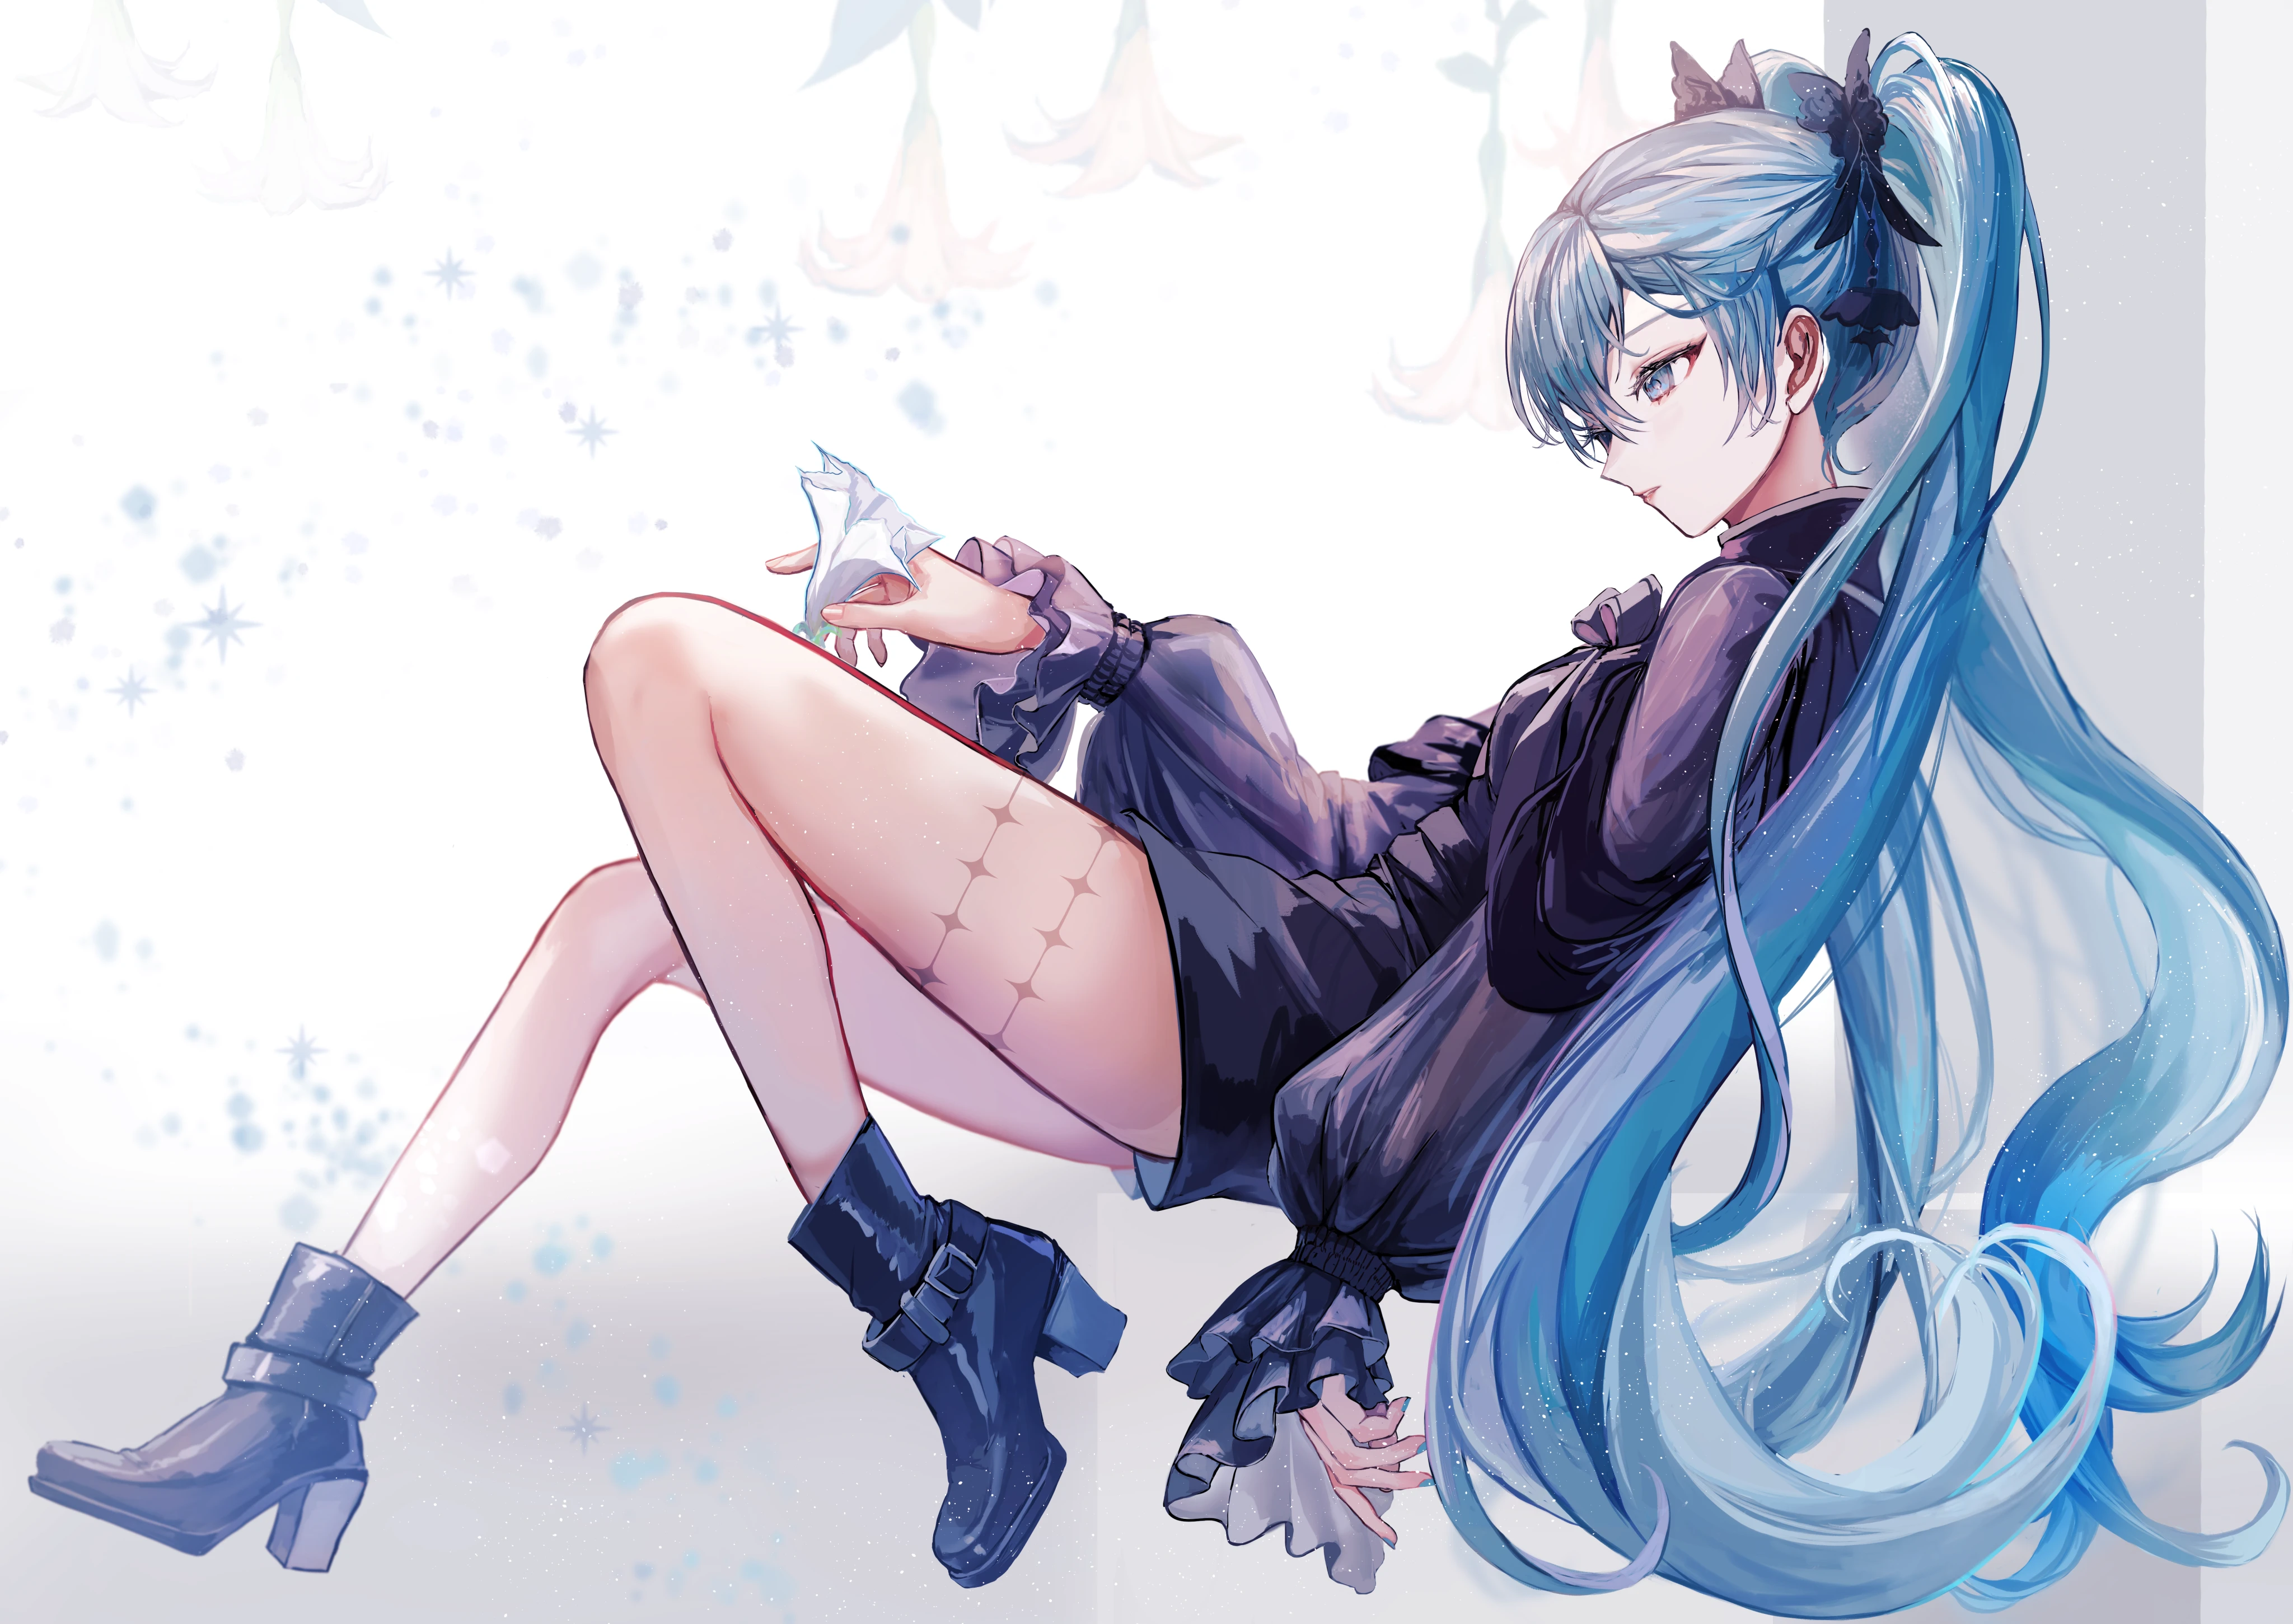 Anime 4096x2901 Hatsune Miku Vocaloid artwork anime anime girls long hair blue hair twintails boots thighs profile long sleeves blue eyes simple background